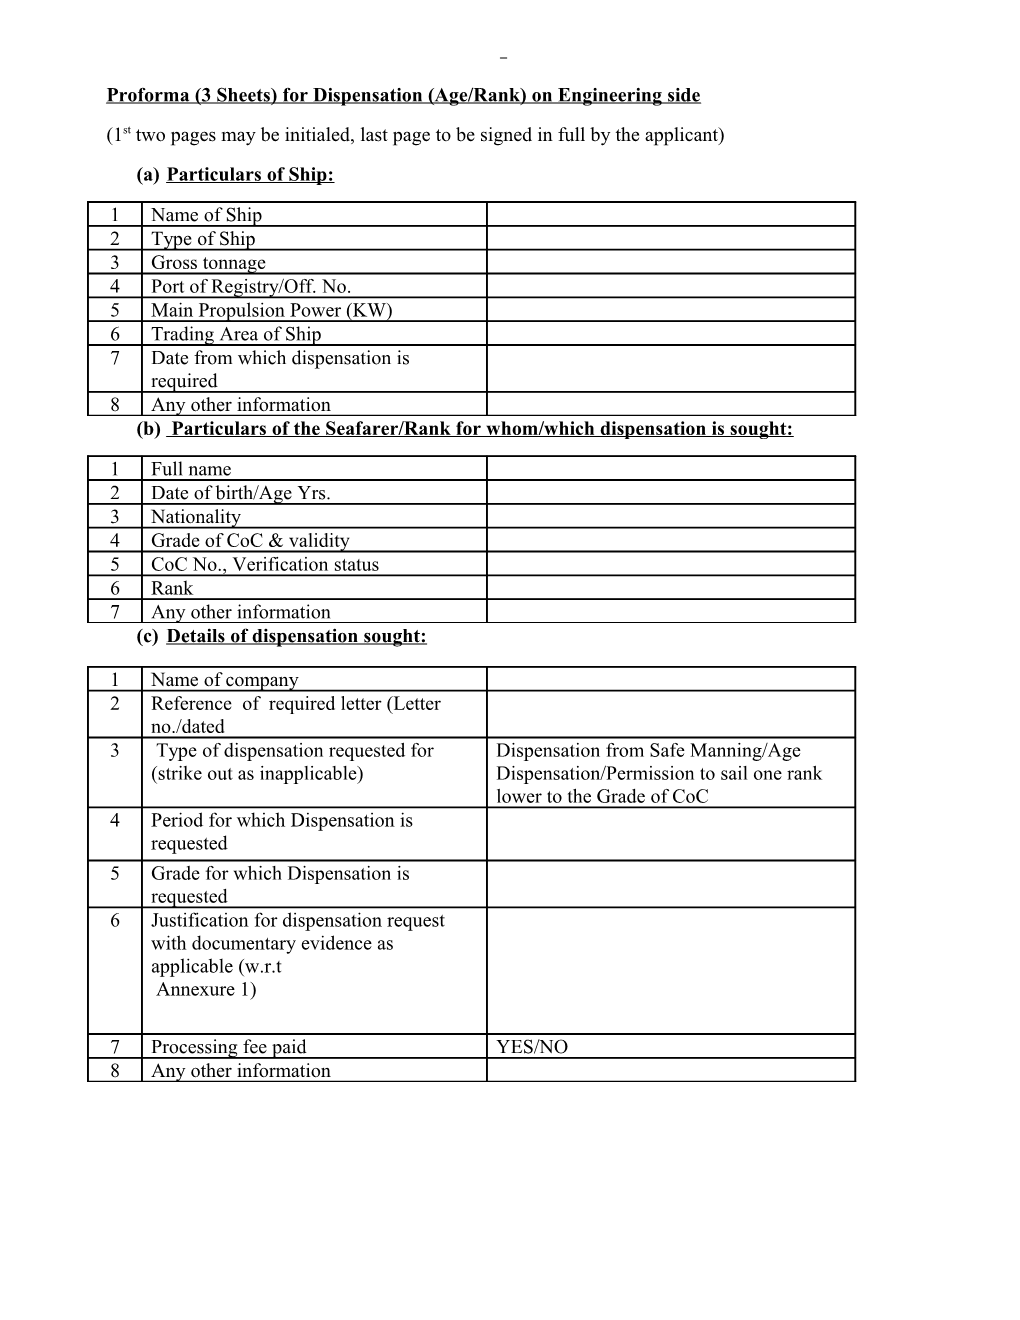 Proforma (3 Sheets) for Dispensation (Age/Rank) on Engineering Side